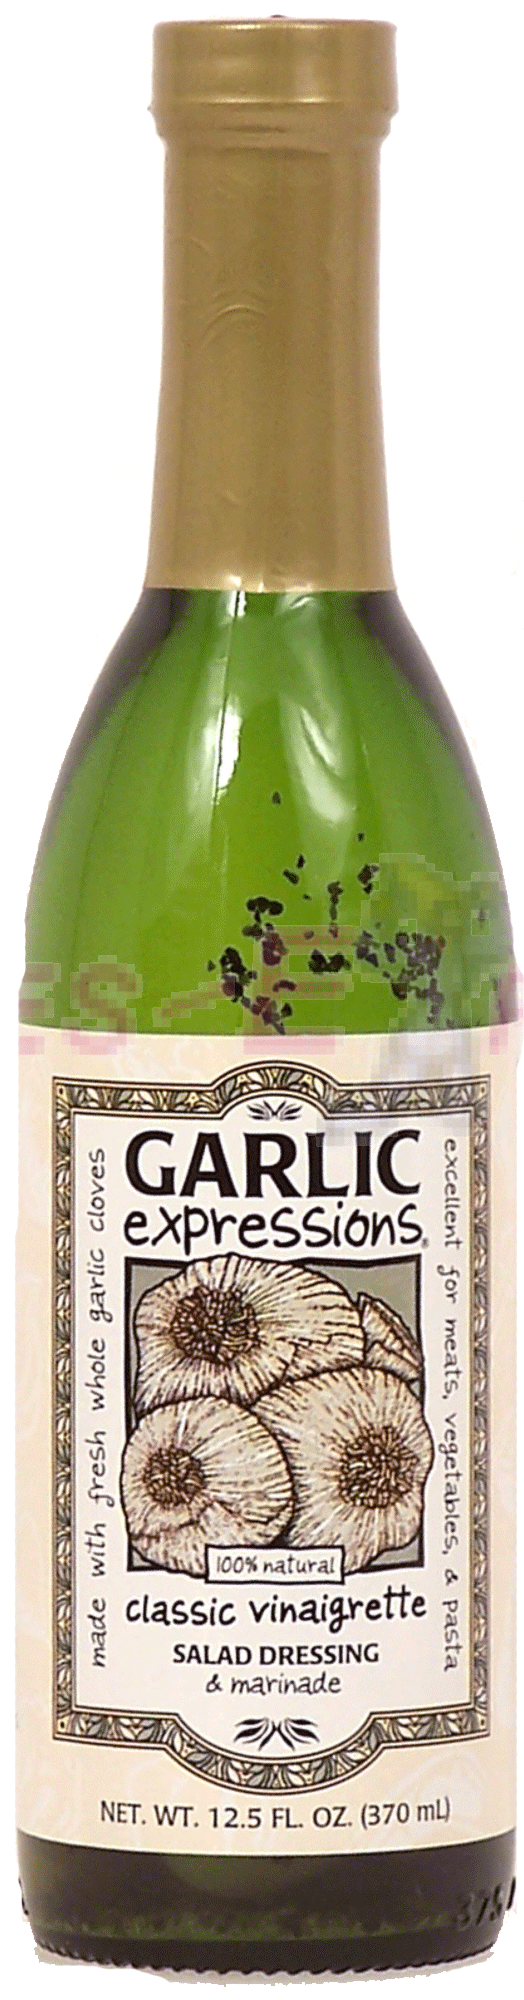 Garlic Expressions  classic vinaigrette salad dressing & marinade Full-Size Picture